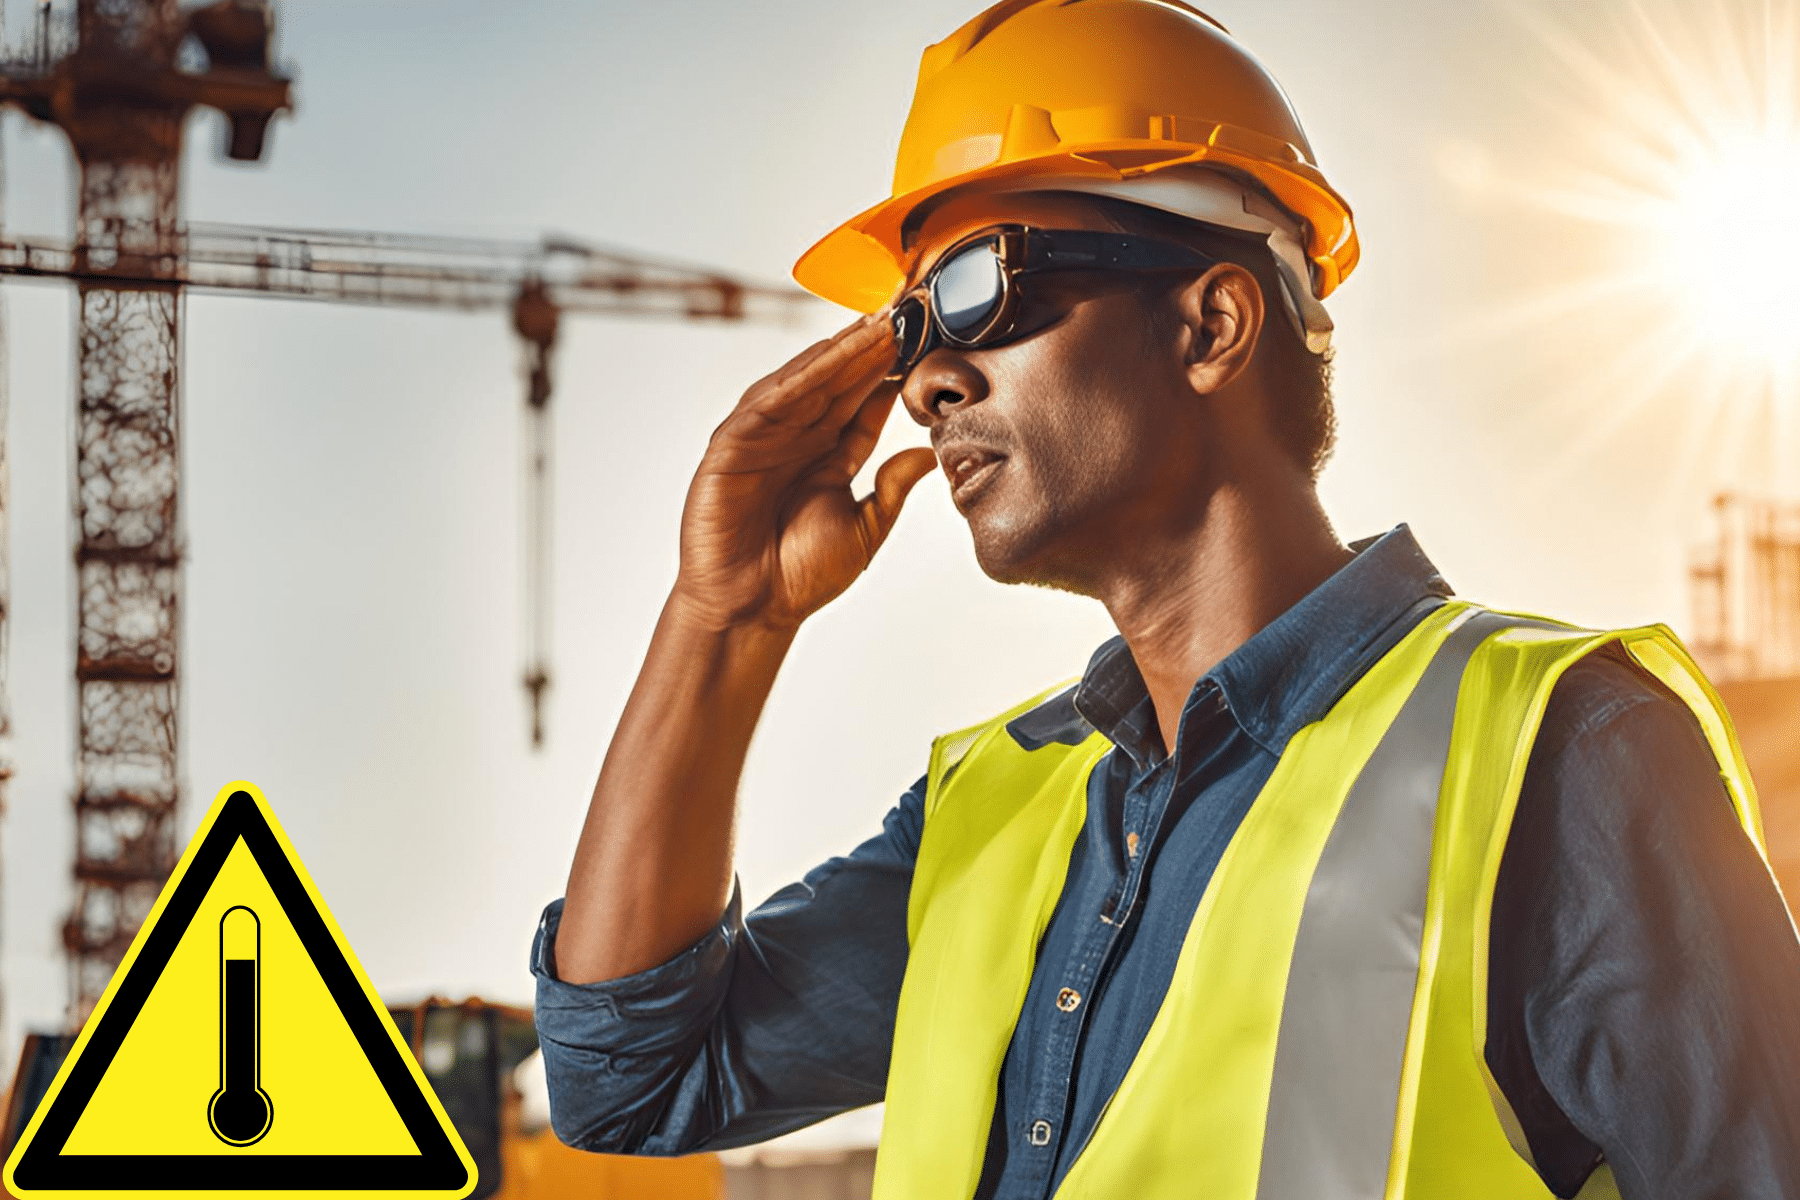 A man on a construction site wearing safety glasses and a safety helmet. He is sweating. The sun shines brightly in the background.